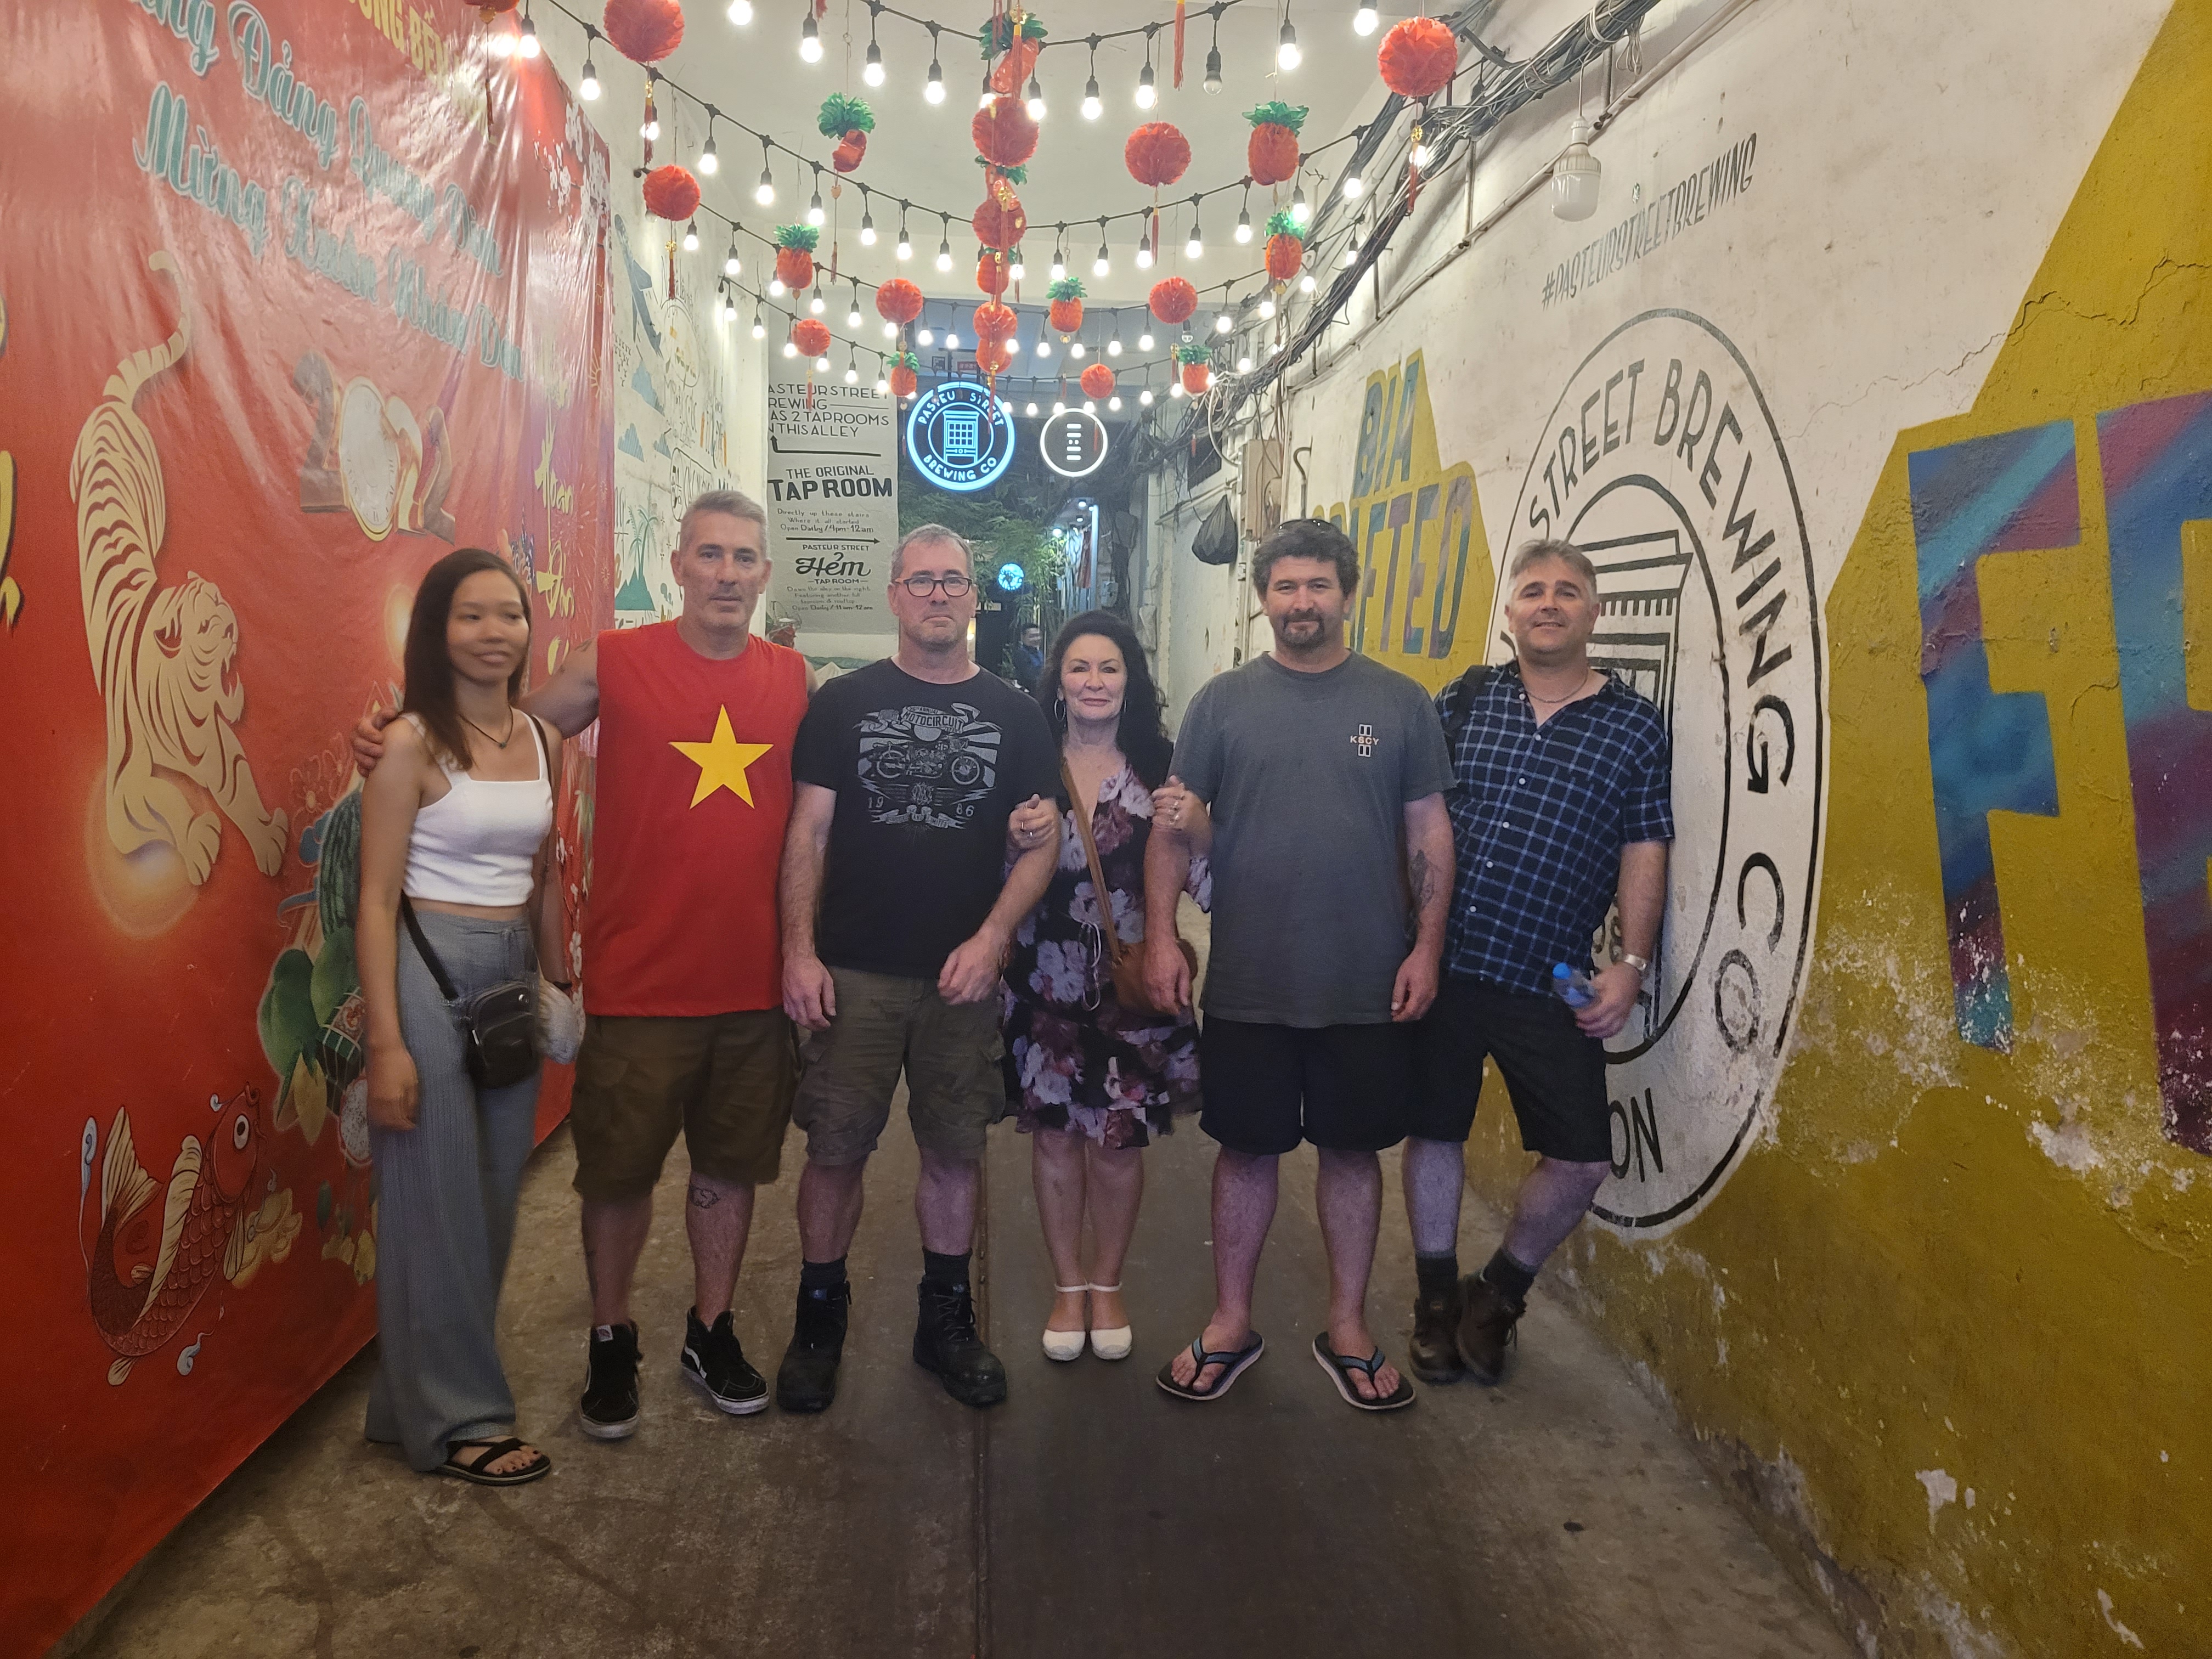 Gavin (second from left) and his family pose for a photo while visiting some of the exciting nightspots in Ho Chi Minh City. Photo: Ray Kuscherts